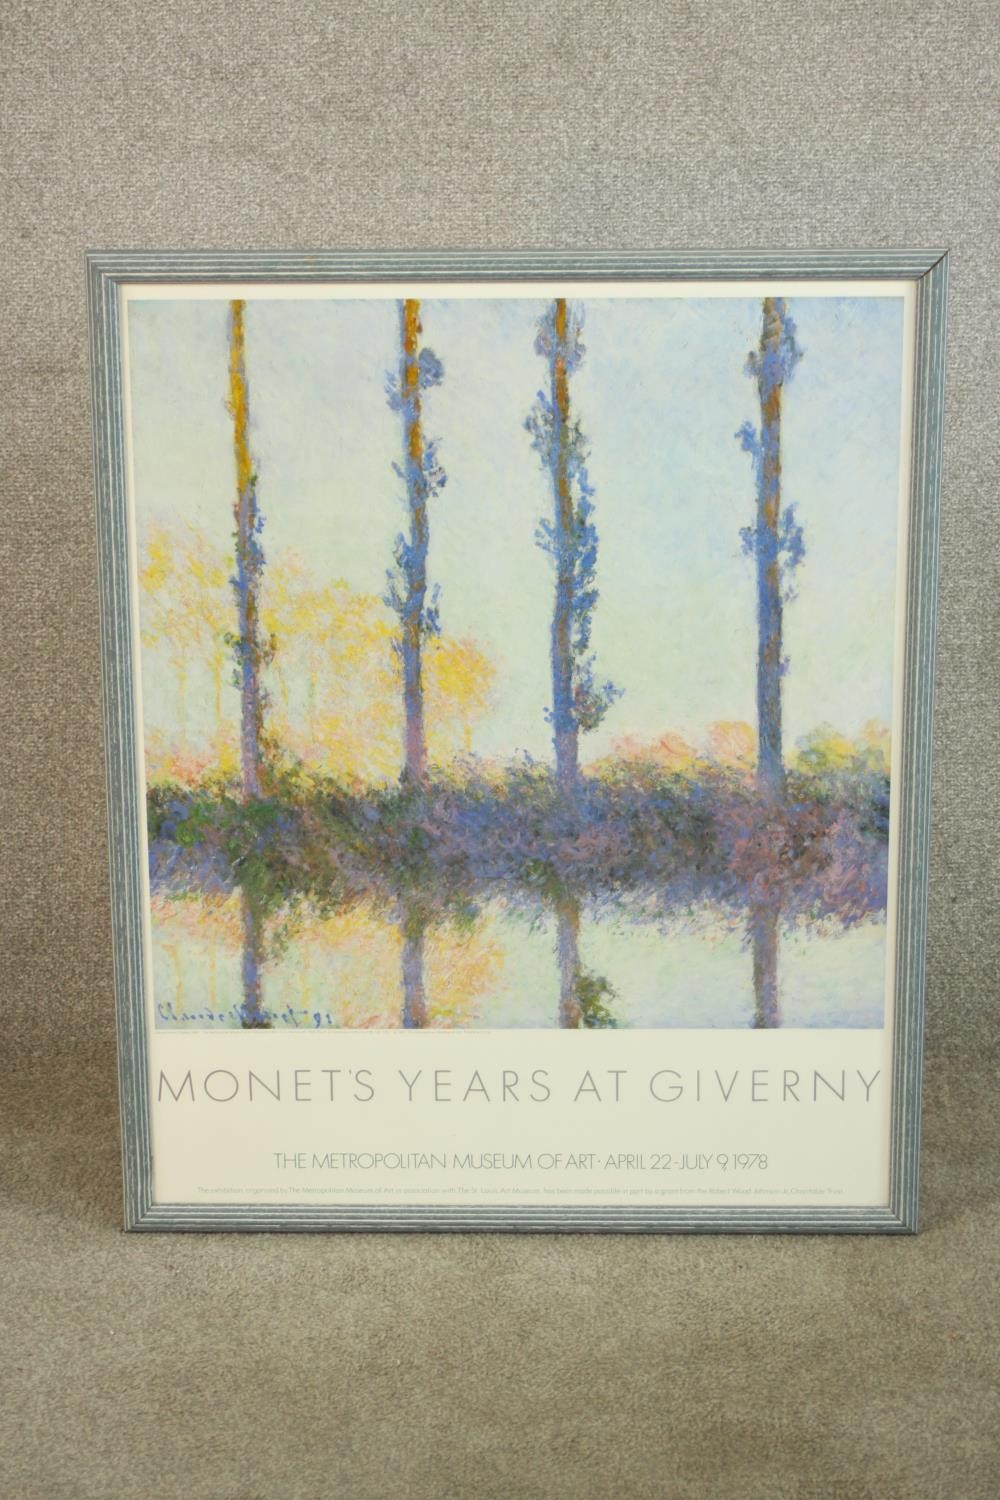 Monet's Years at Giverny, a mid 20th century exhibition poster from the Metropolitan Museum of Art - Image 2 of 6